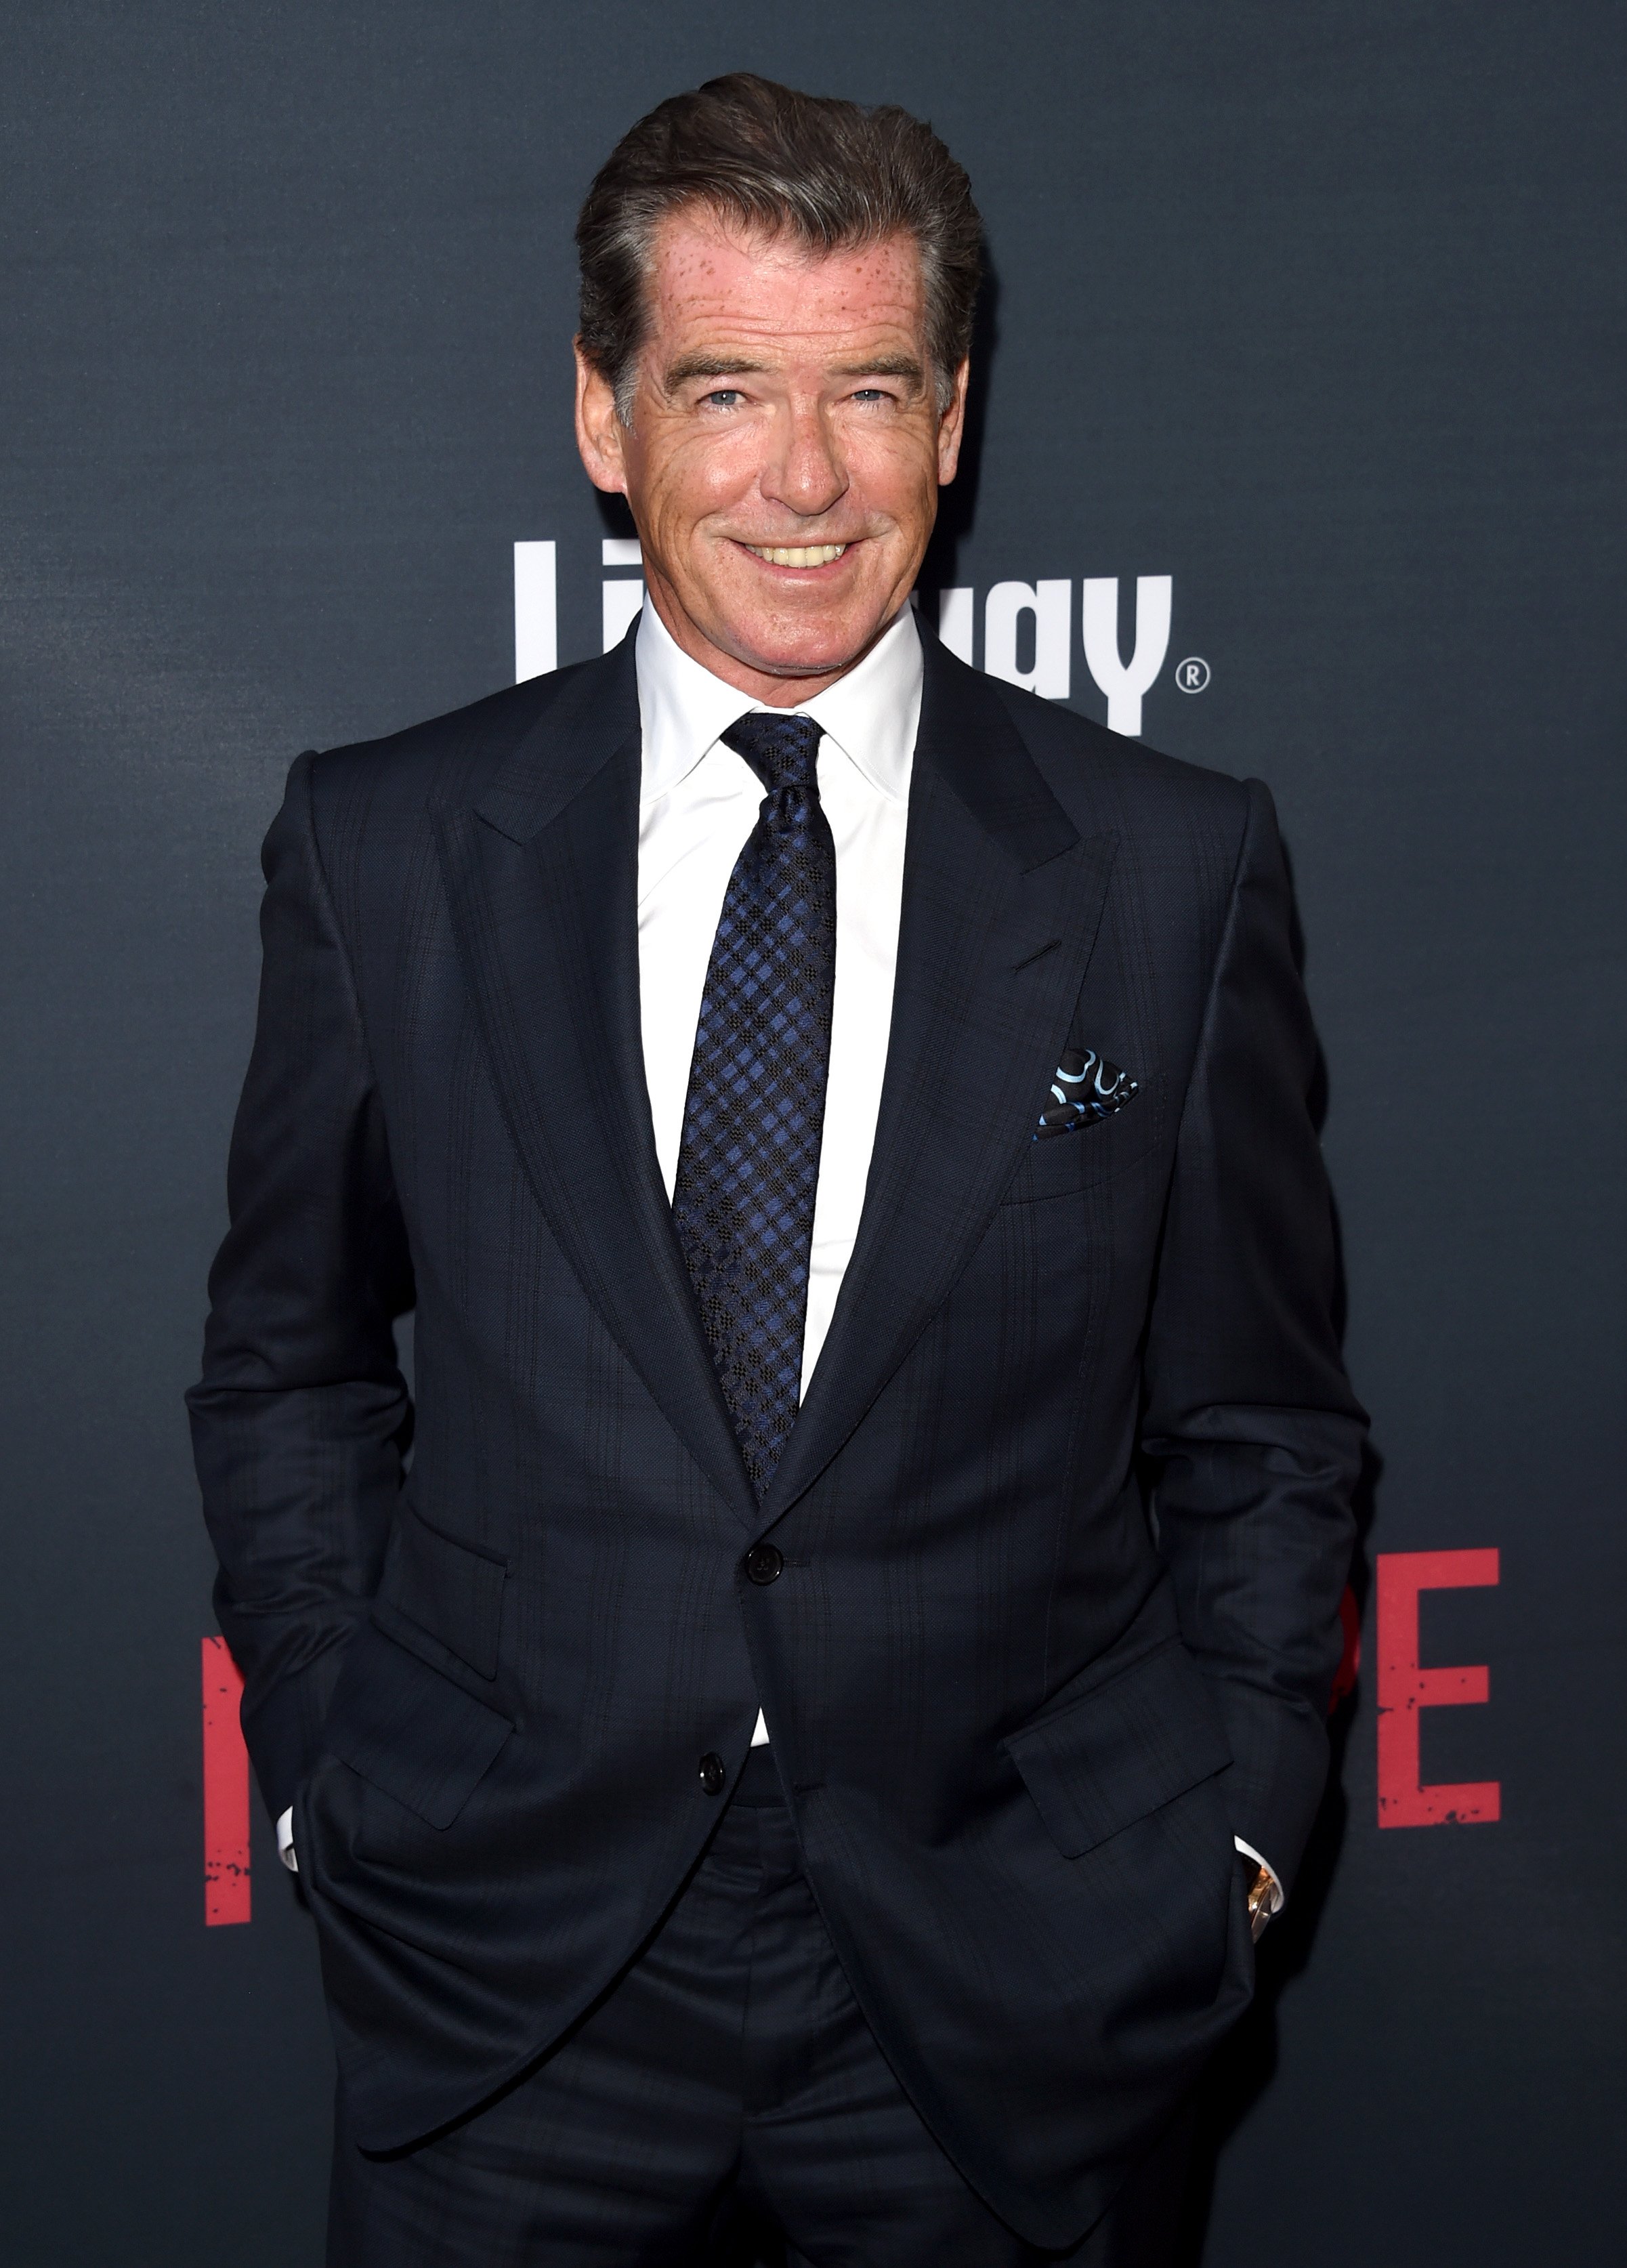 Pierce Brosnan arrives at The Premiere Of The Weinstein Company's "No Escape" at Regal Cinemas L.A. Live on August 17, 2015. | Photo: GettyImages 